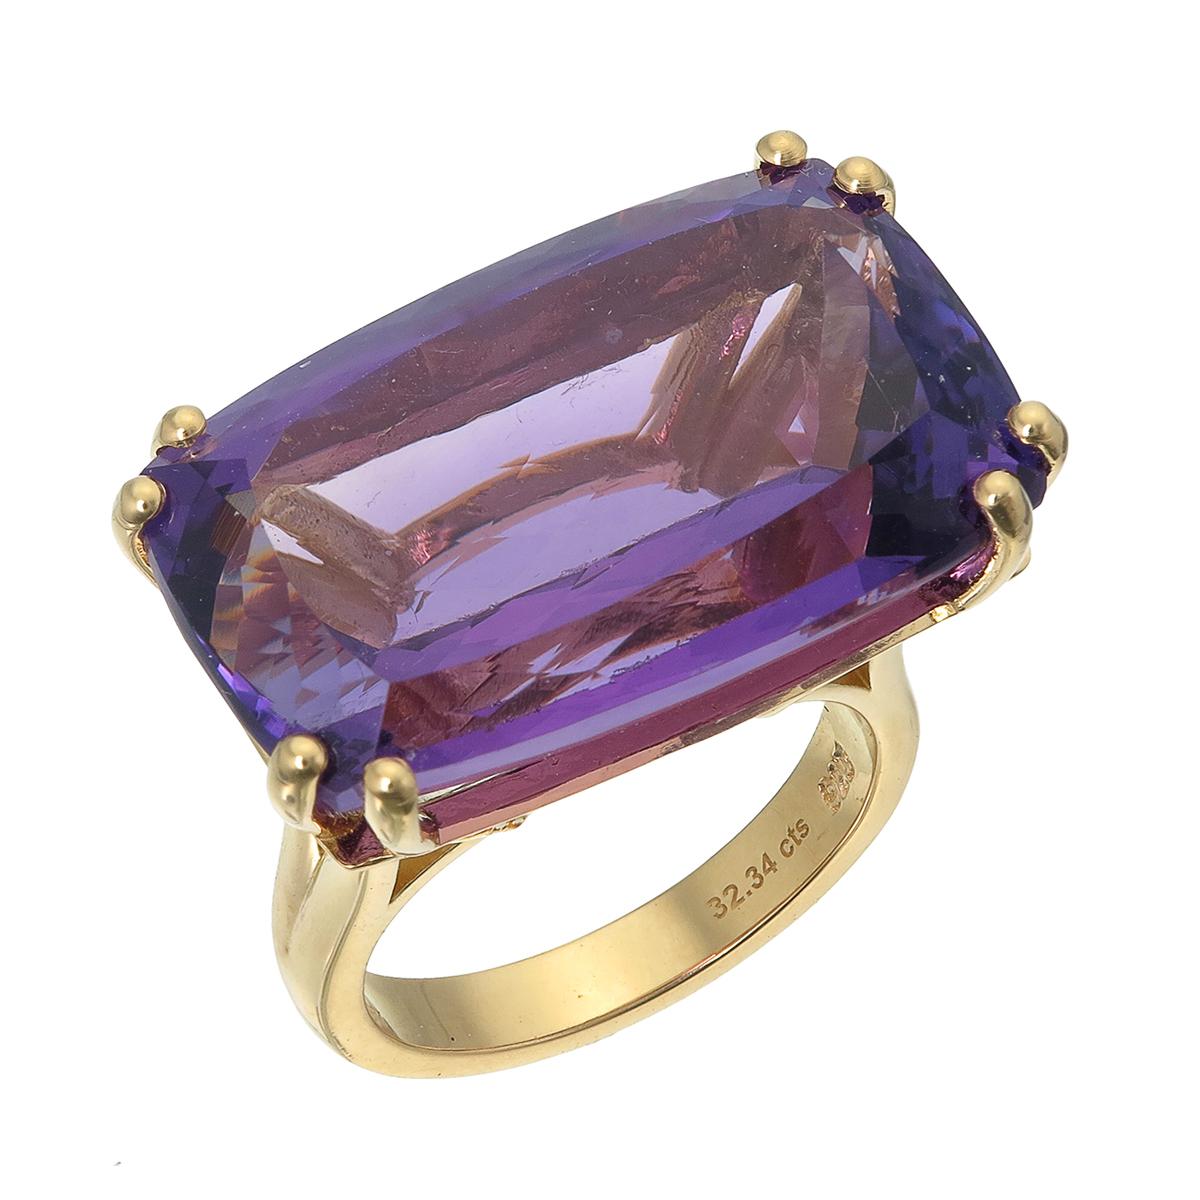 Orloff of Denmark; 18 Karat Gold-Plated Sterling Silver Amethyst Cocktail Ring.

Introducing a striking statement ring crafted in 925 silver and later plated in stunning 18 Karat gold. 
Rising from the center is a captivating 32 carat Amethyst hold